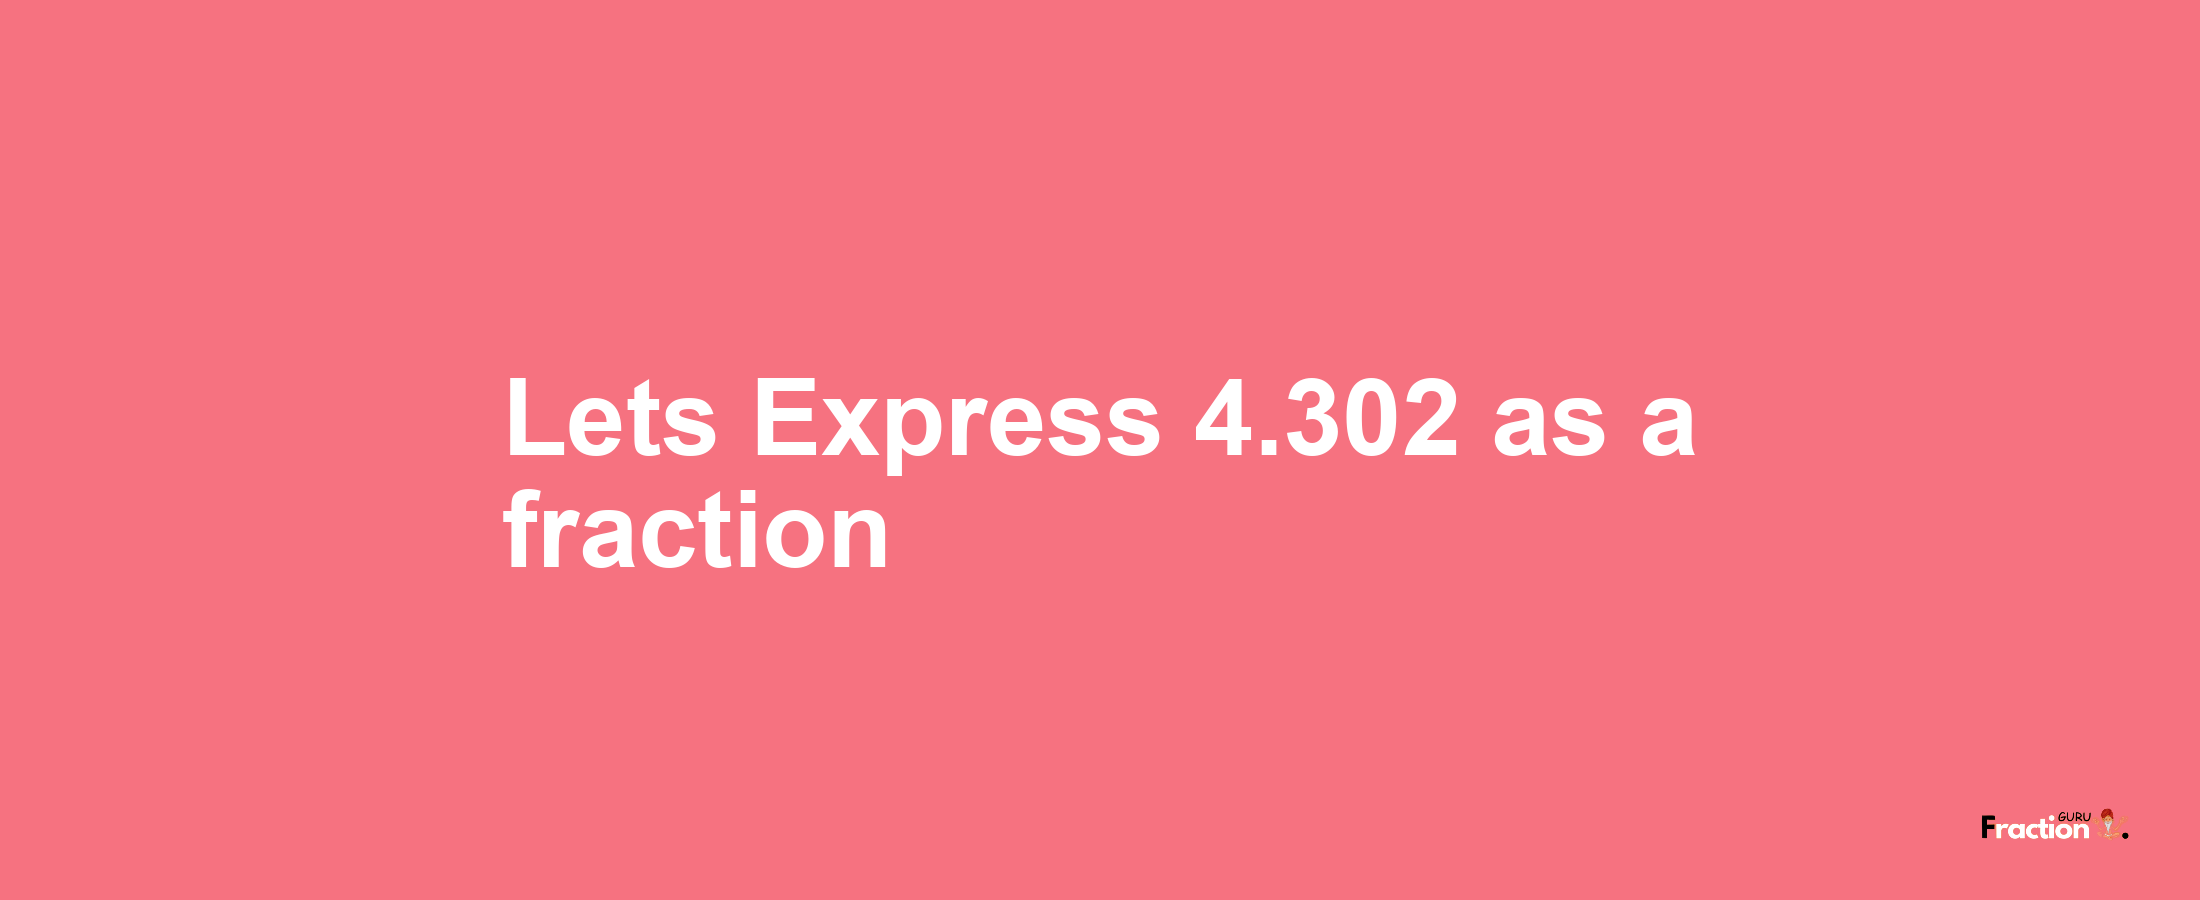 Lets Express 4.302 as afraction